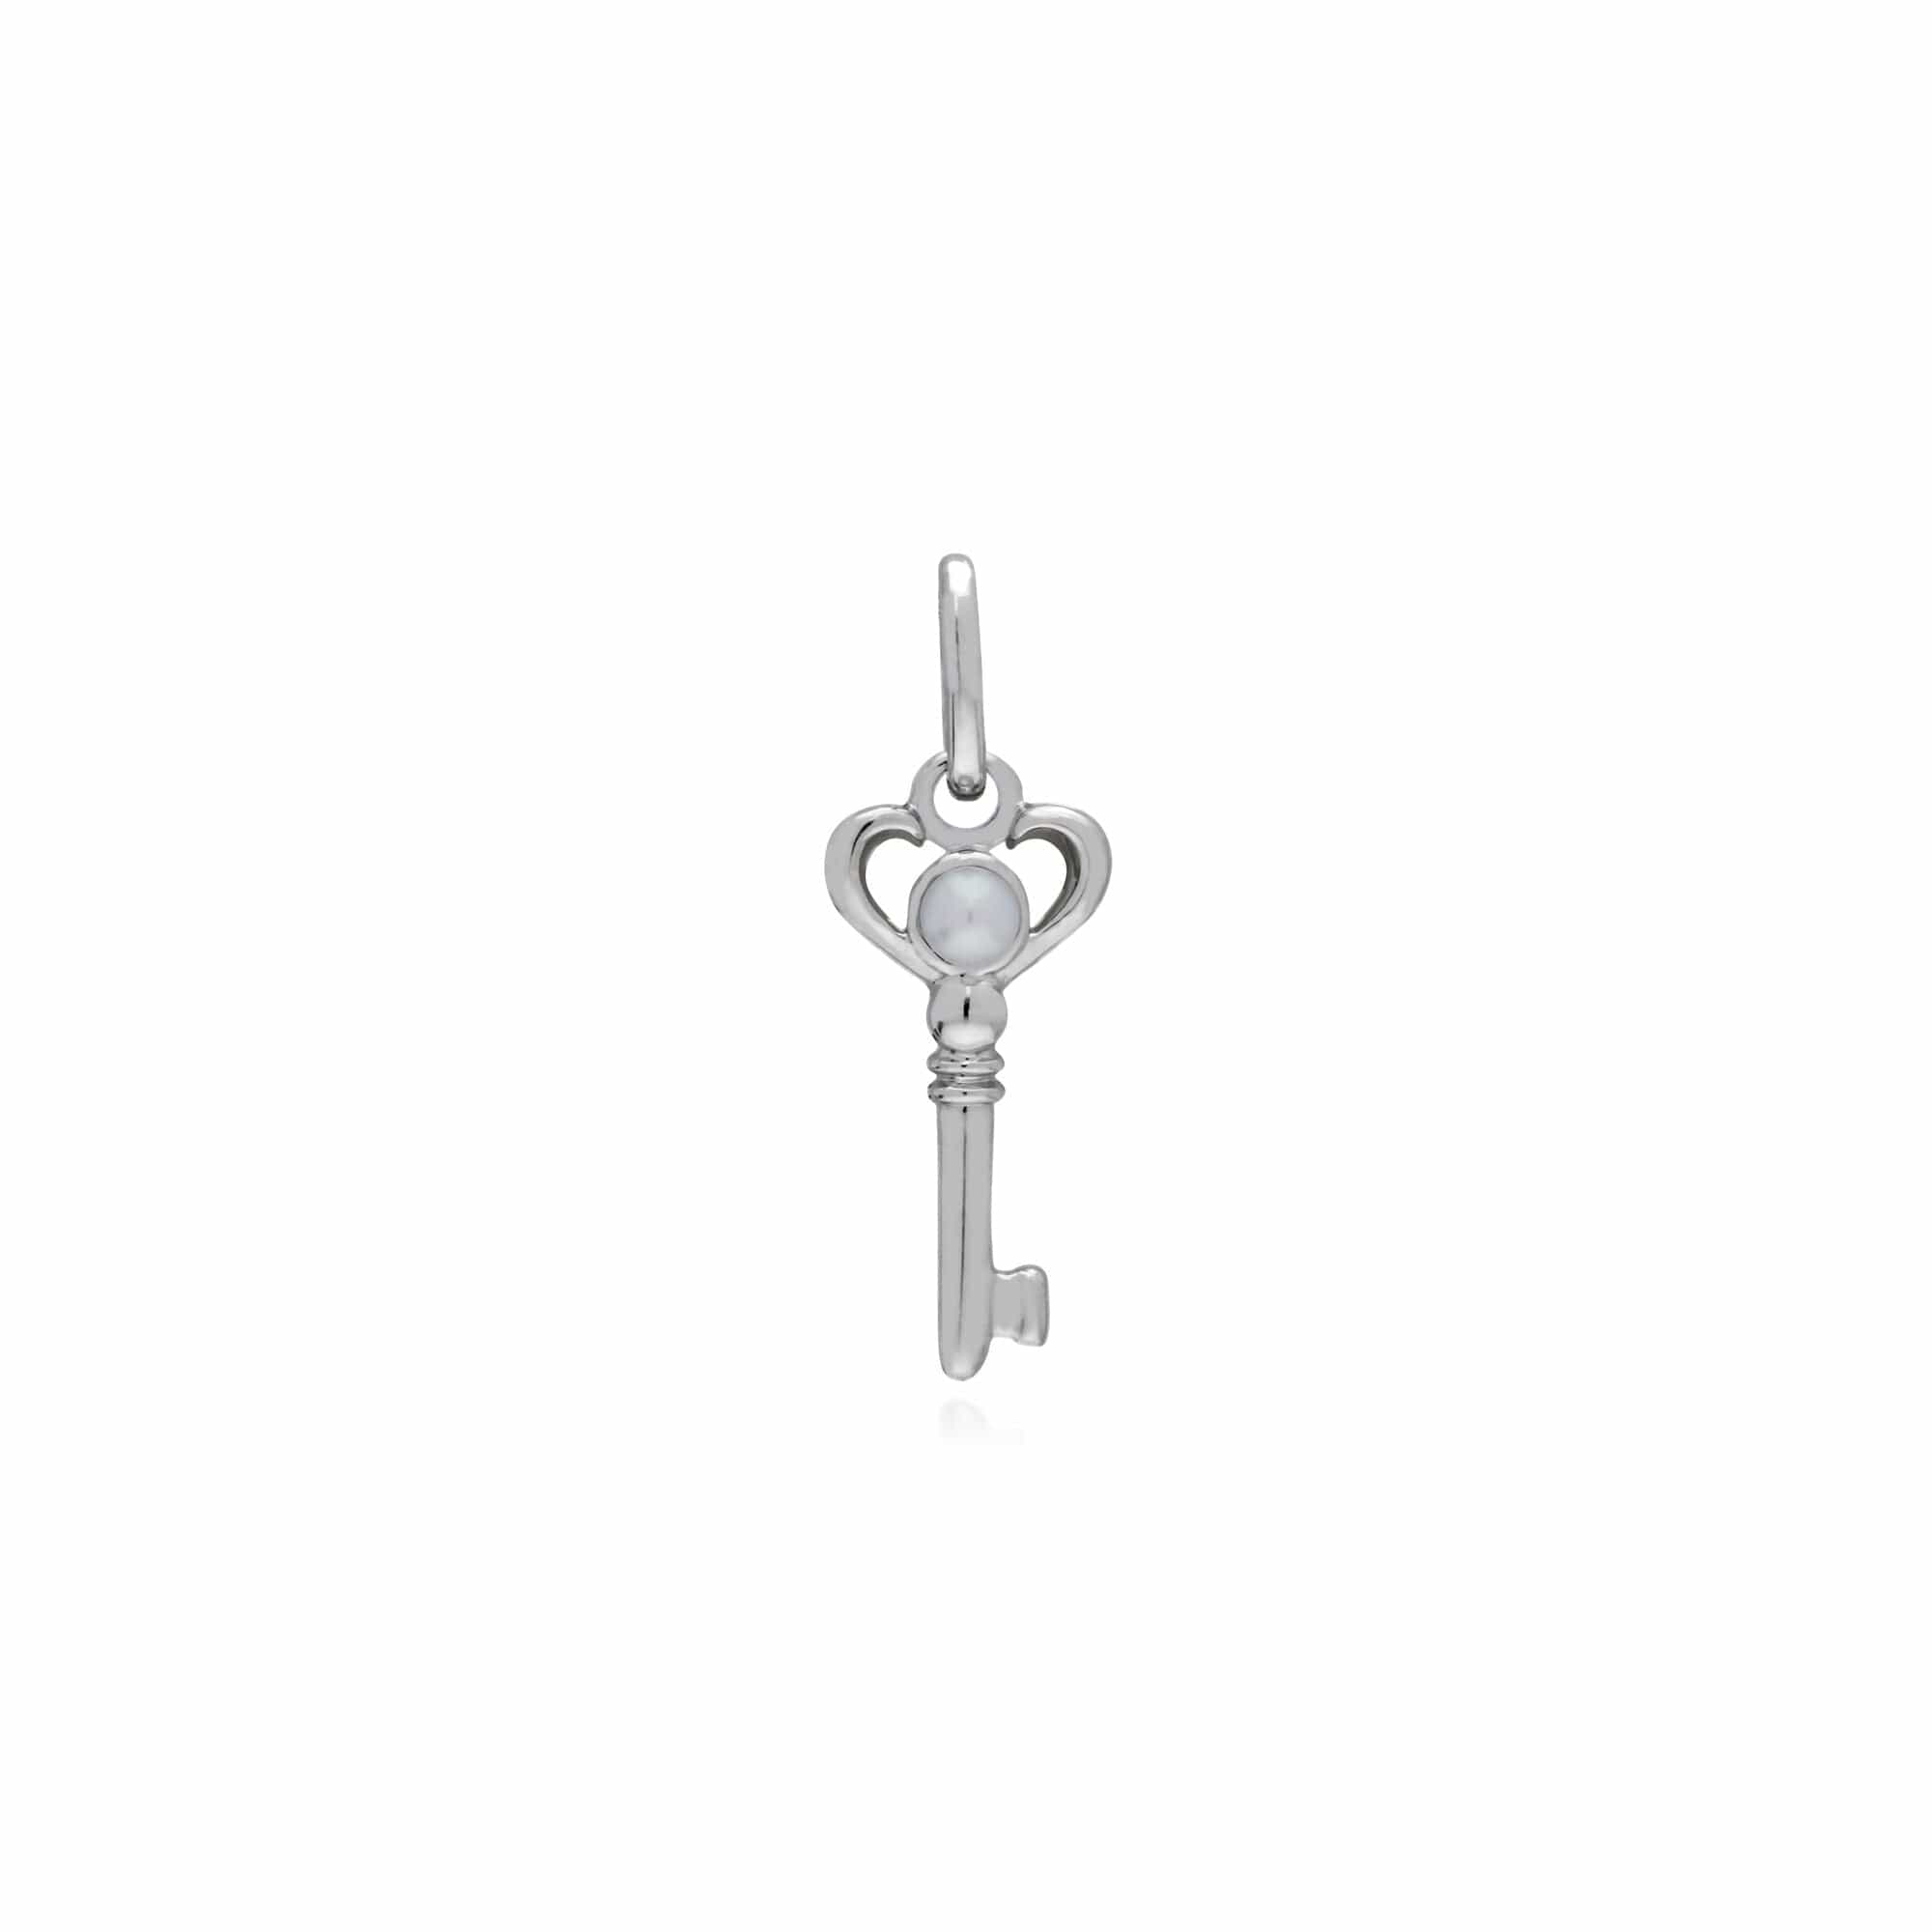 270P027201925-270P027001925 Classic Heart Lock Pendant & Pearl Key Charm in 925 Sterling Silver 2